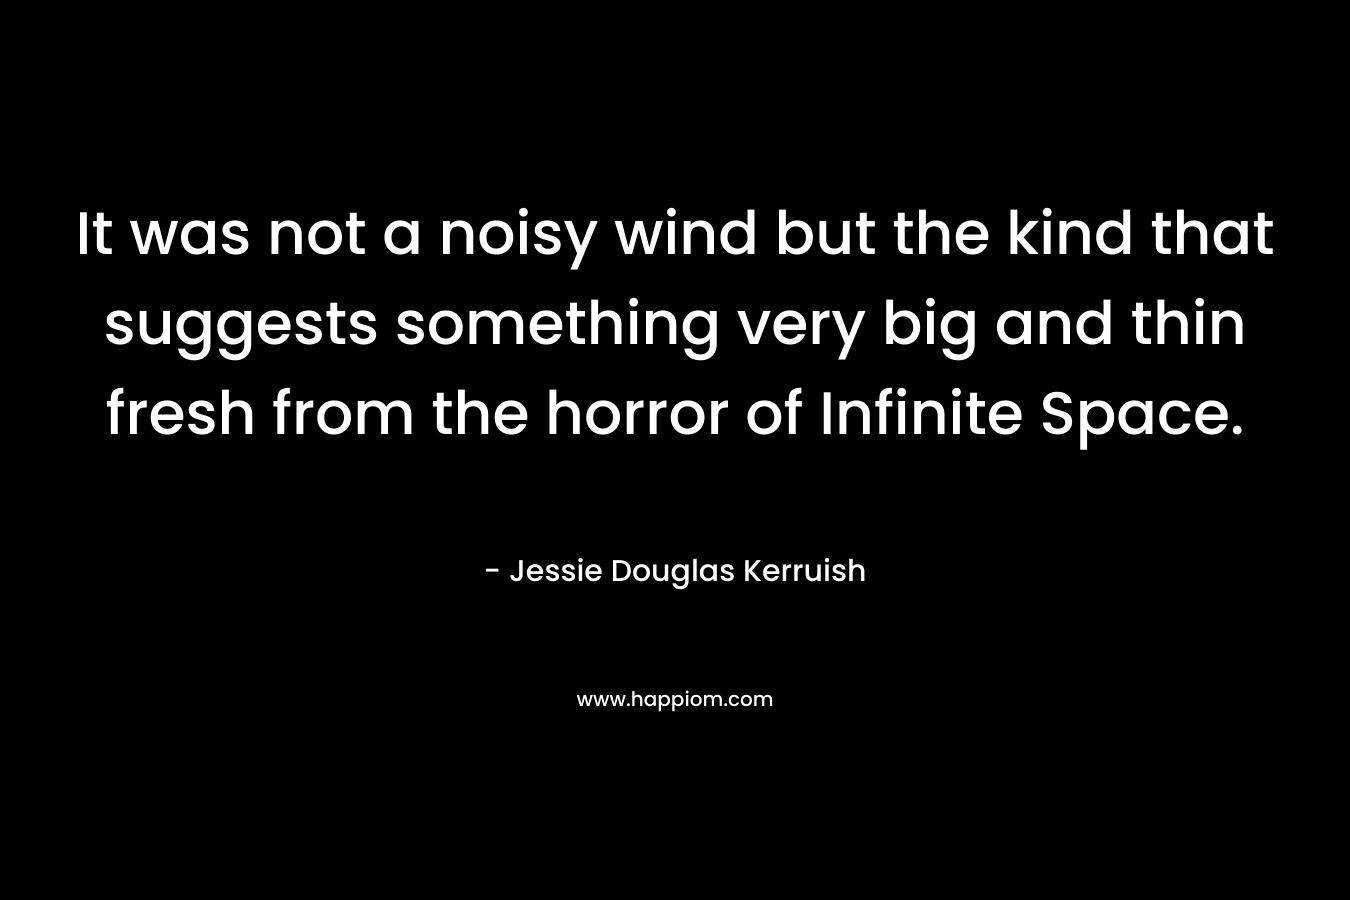 It was not a noisy wind but the kind that suggests something very big and thin fresh from the horror of Infinite Space. – Jessie Douglas Kerruish